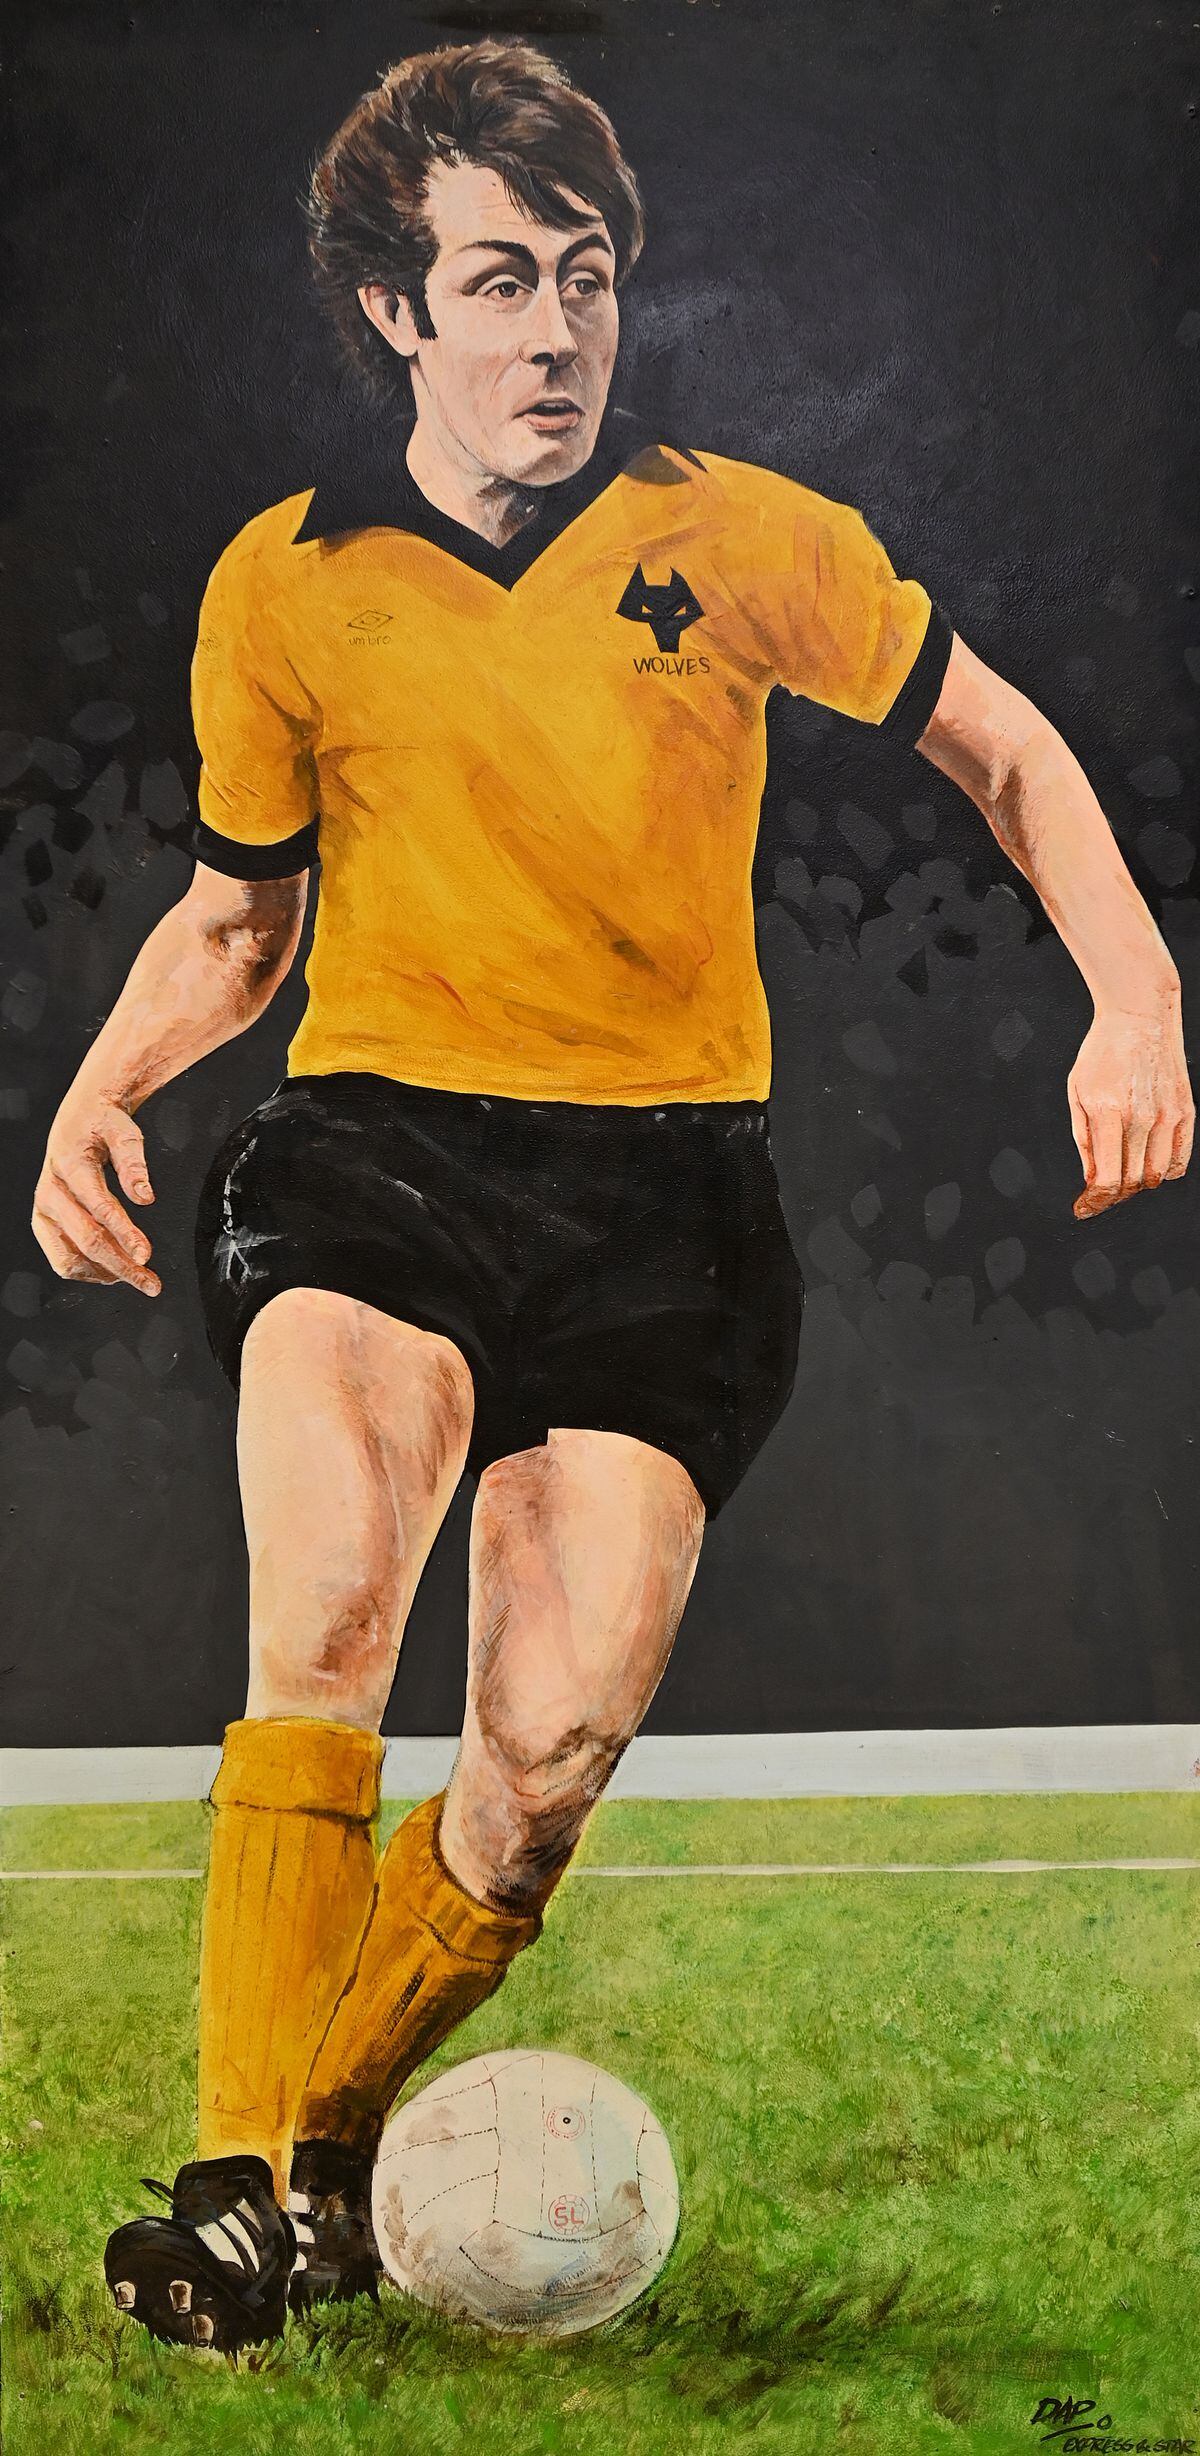 John Richards was Wolves record goalscorer and scored the winner in the 1974 League Cup final